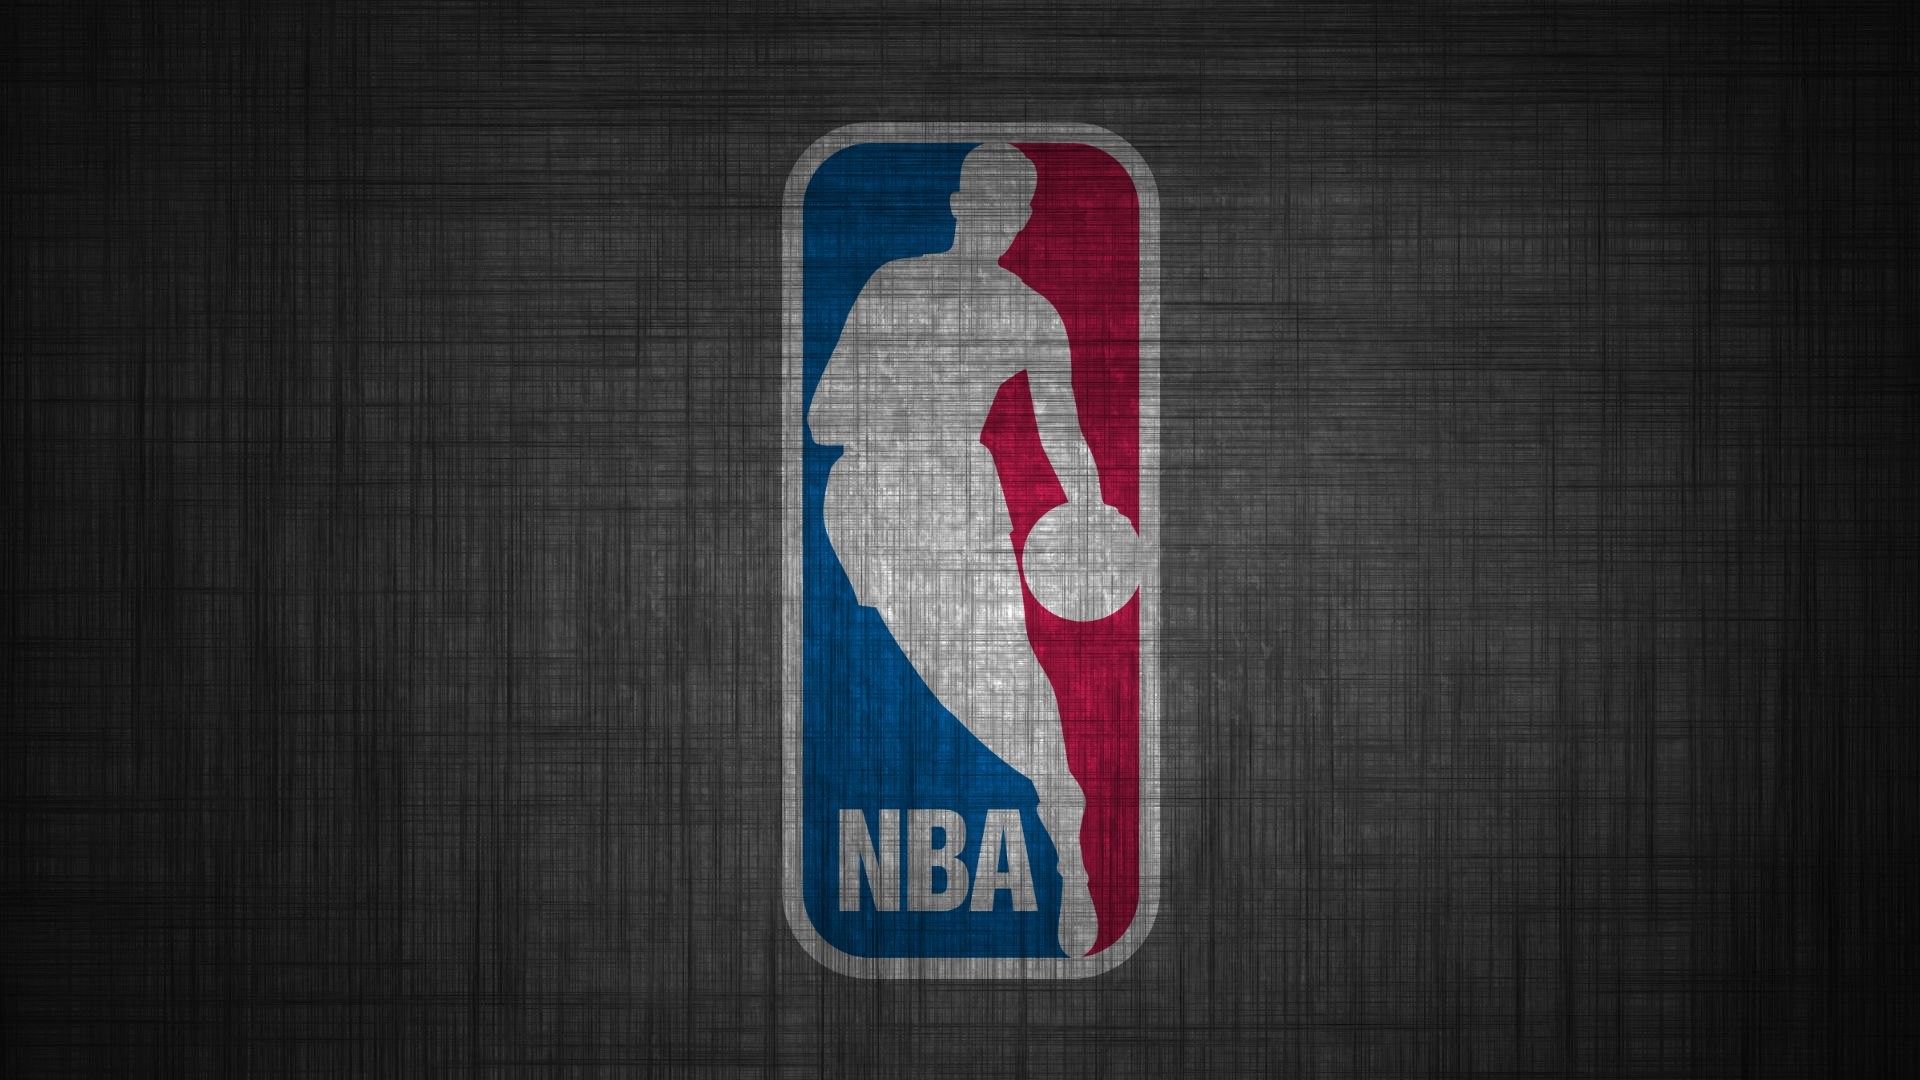 1920x1080 Nba Wallpapers HD, Desktop Backgrounds, Images and Pictures 1600Ã1000 Nba Wallpaper  Hd (49 Wallpapers) | Adorable Wallpapers | Desktop | Pinterest | Nba ...